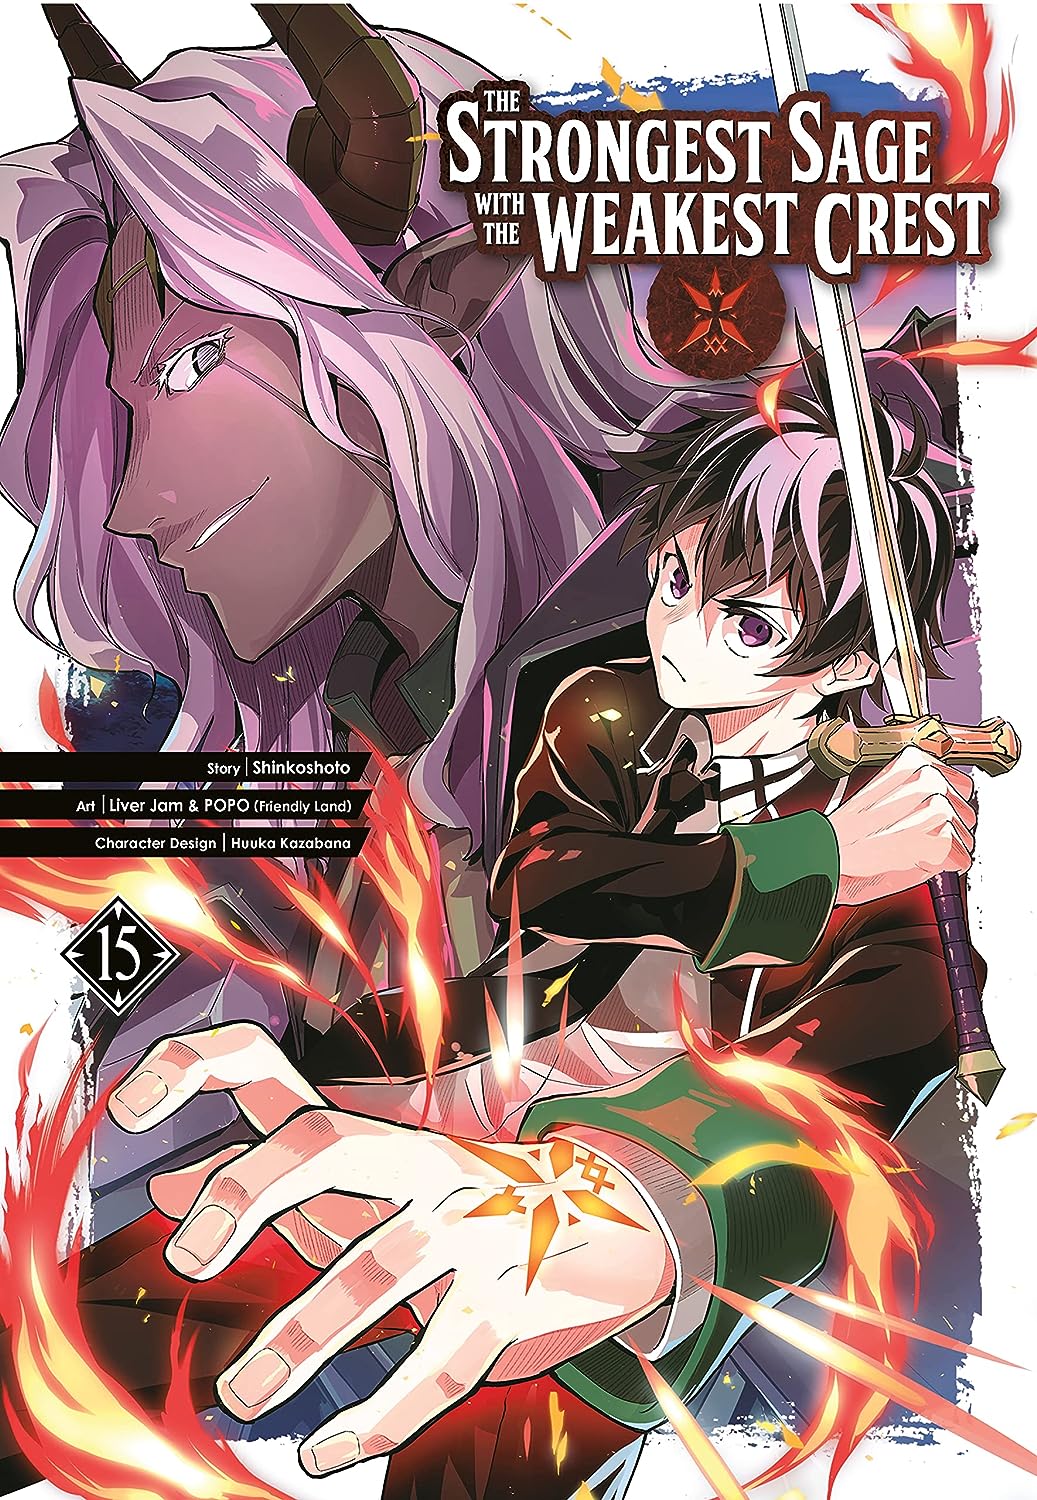 The Strongest Sage with the Weakest Crest Vol. 15